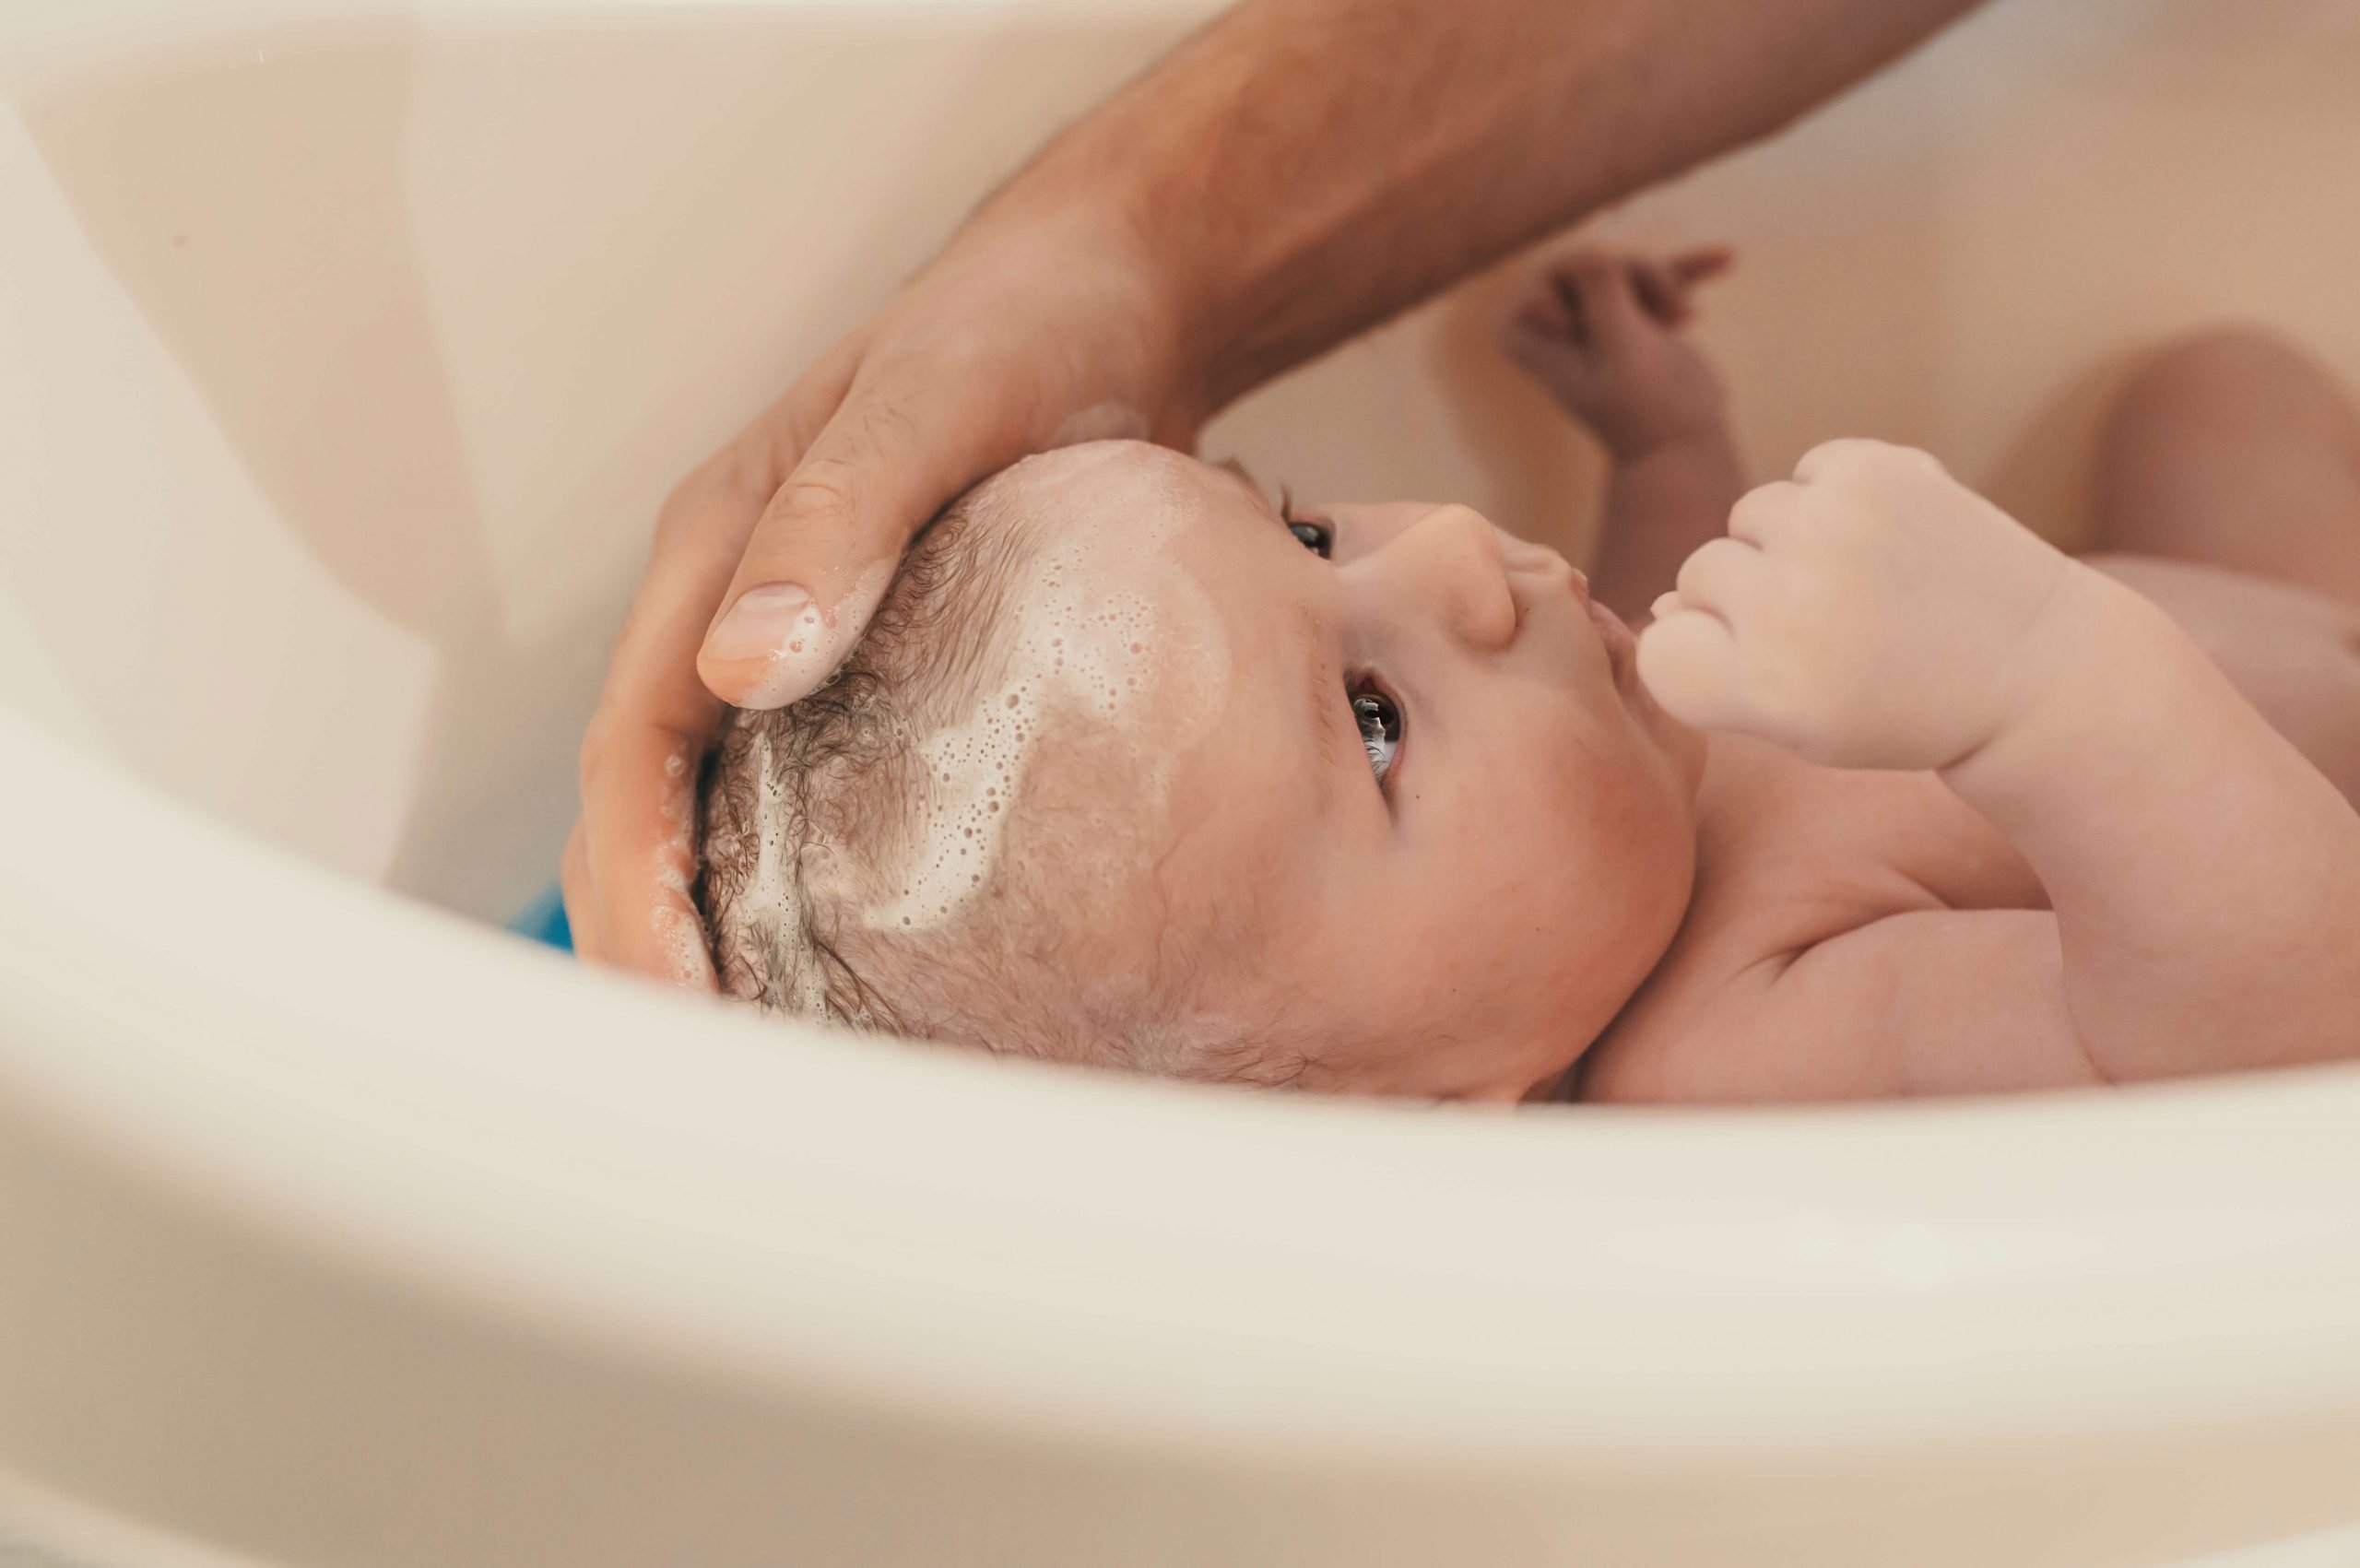 7 Questions You Have About Giving Your Baby a Bath